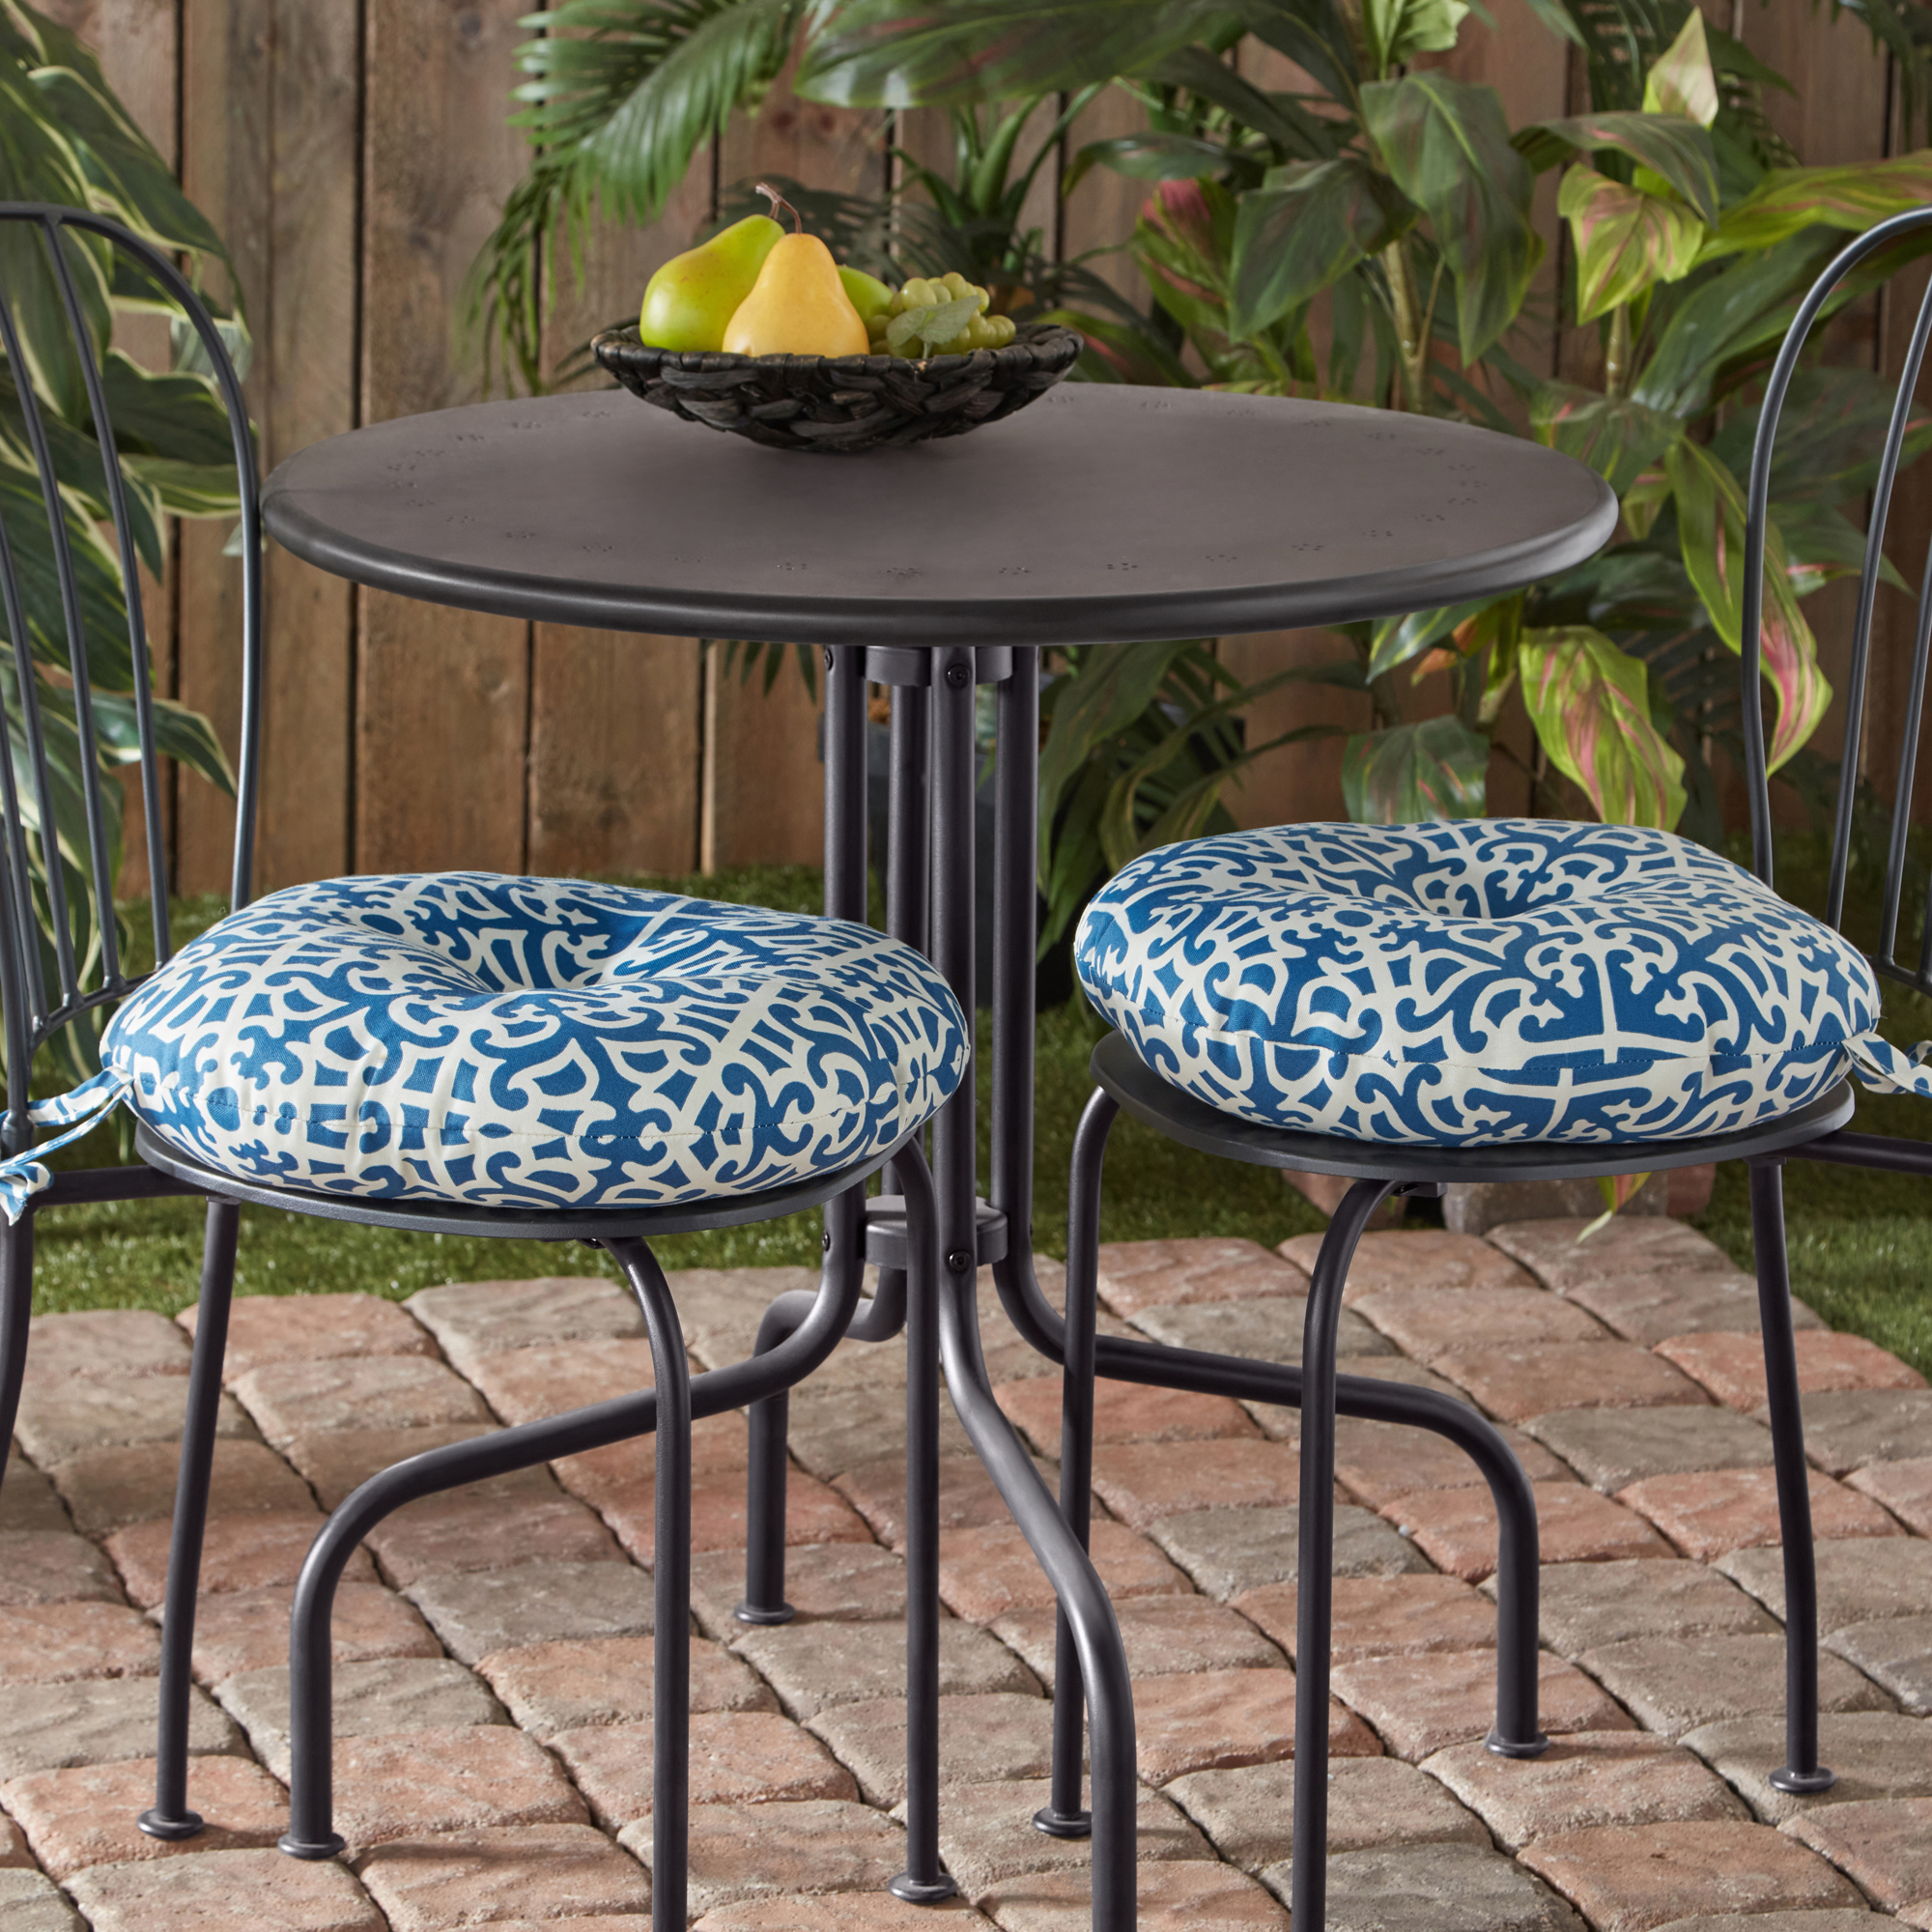 Greendale Home Fashions Indigo Lattice 15 in. Round Outdoor Reversible Bistro Seat Cushion (Set of 2) - image 3 of 6